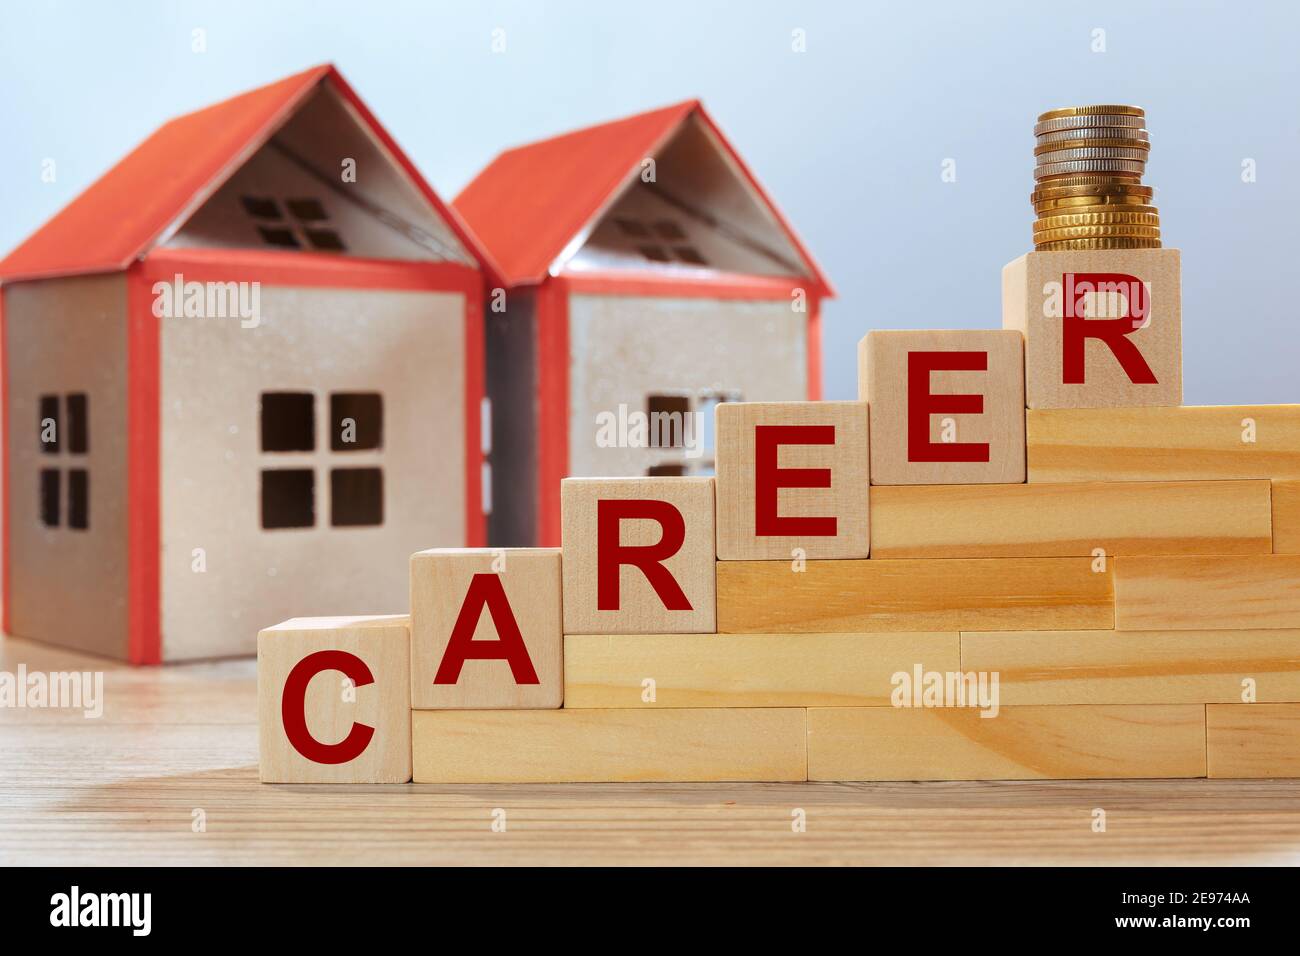 House models and inscription on wooden cubes - CAREER. Real estate investment concept. Stock Photo